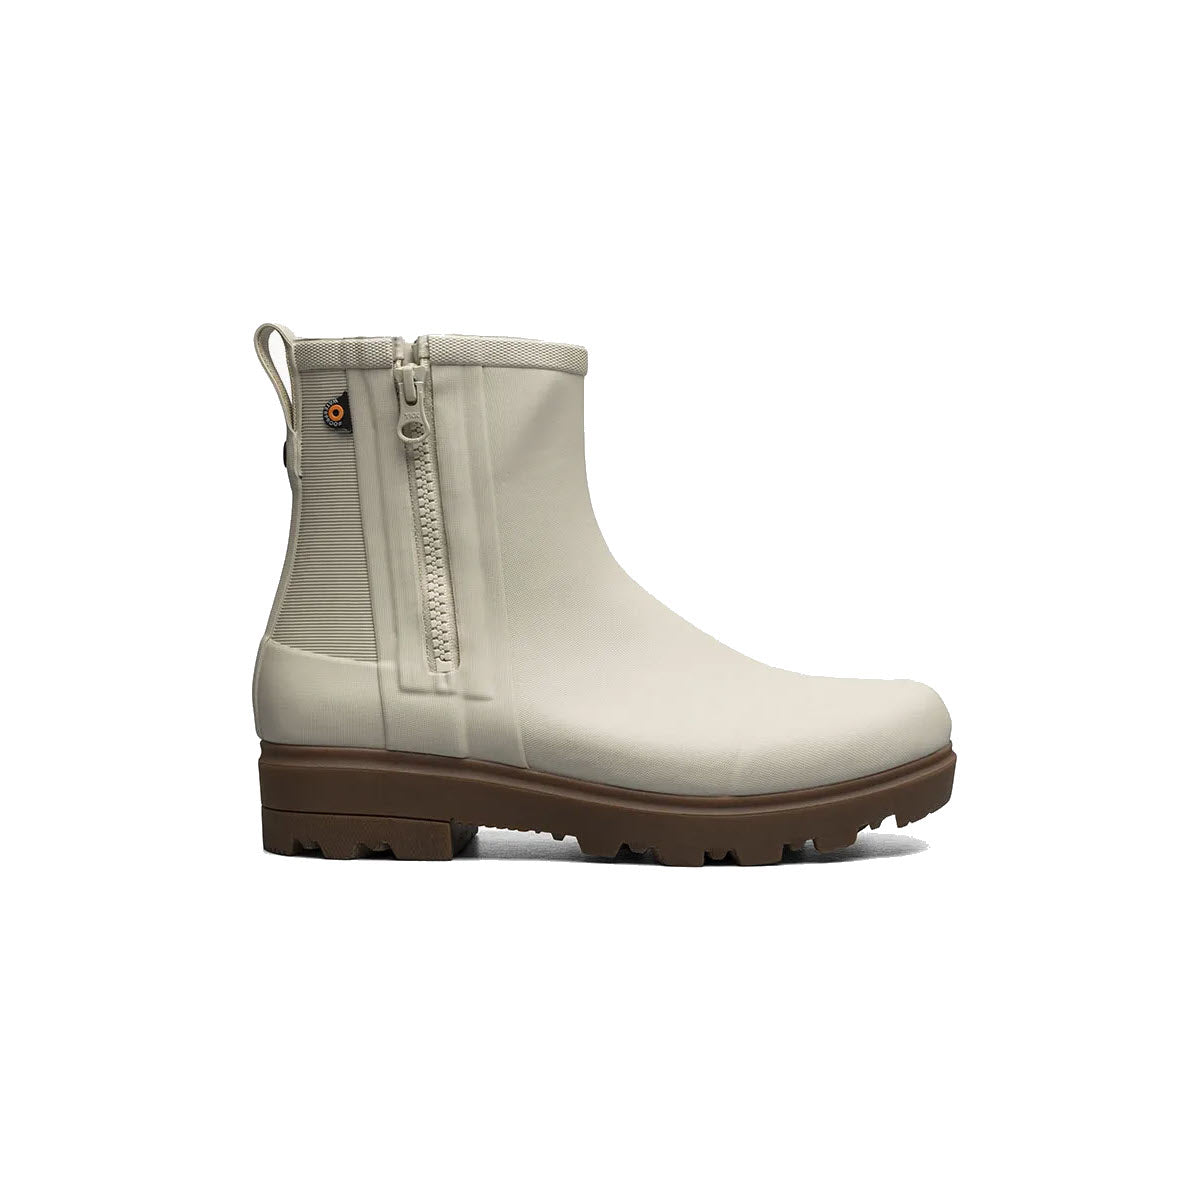 Cream-colored ankle boot with a waterproof design and chunky brown sole, displayed on a white background - BOGS HOLLY RAIN ZIP OATMEAL - WOMENS by Bogs.